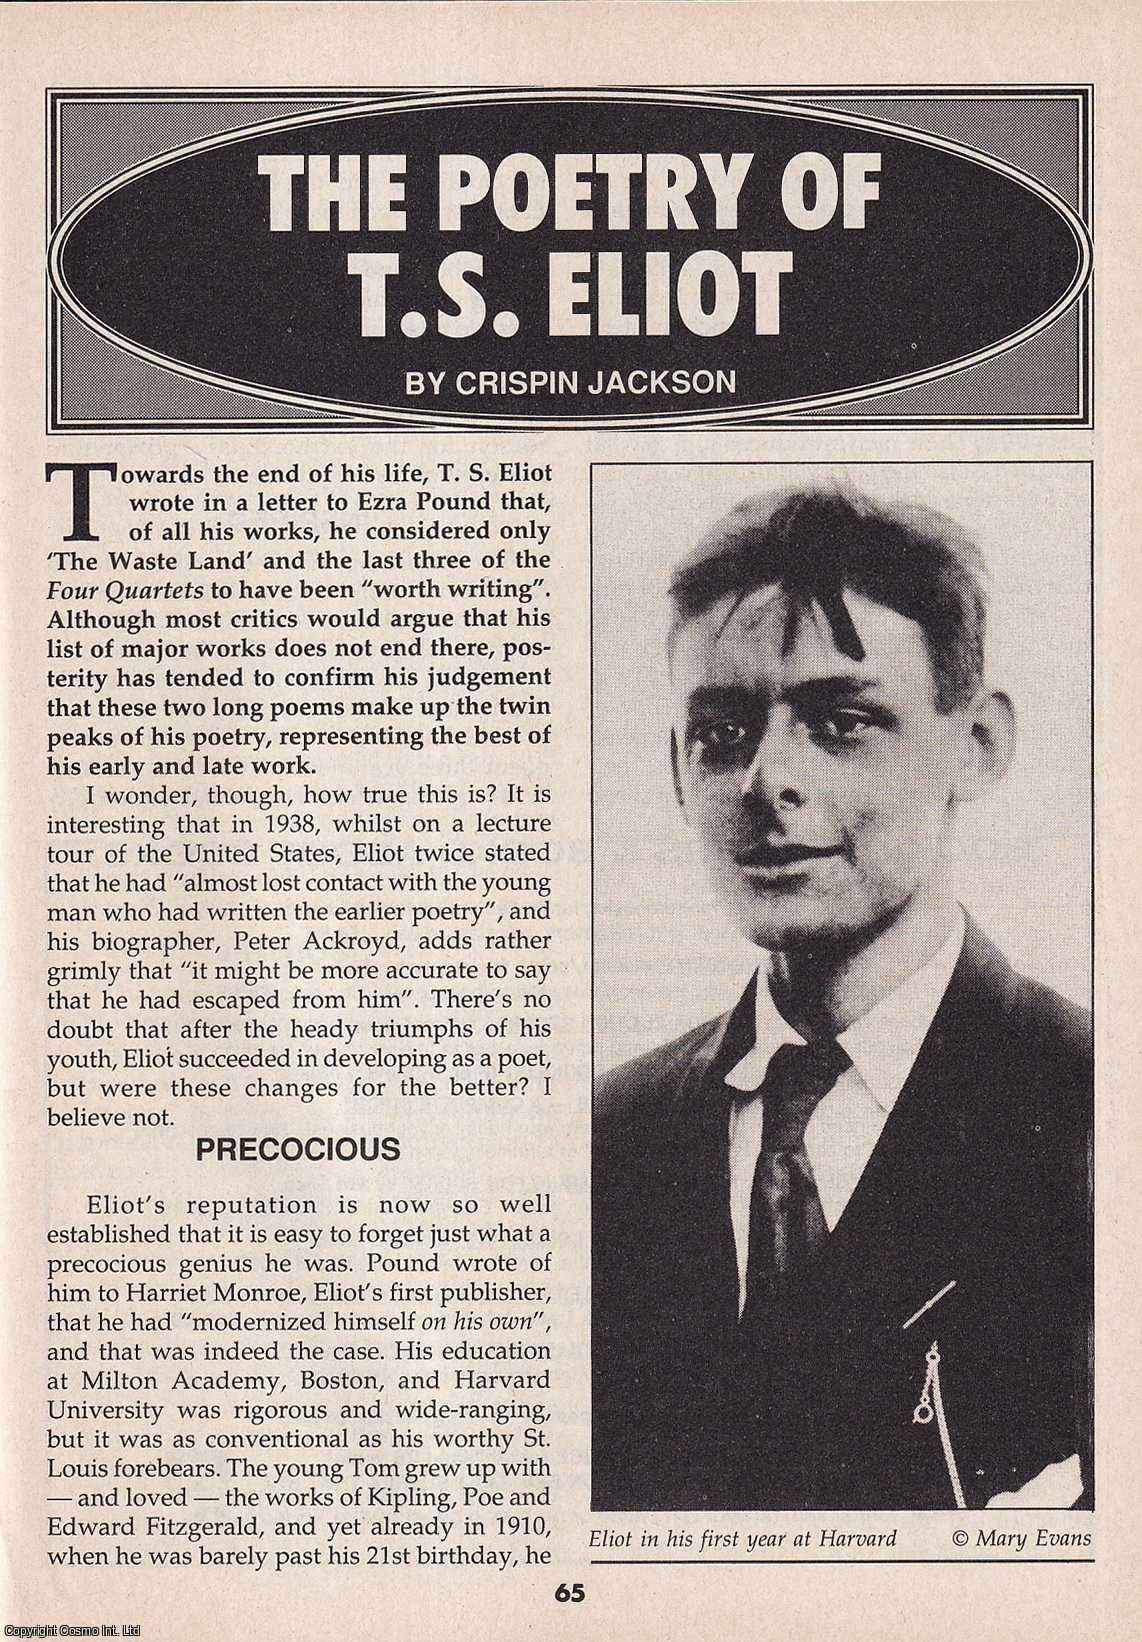 Crispin Jackson - The Poetry of T. S. Eliot. This is an original article separated from an issue of The Book & Magazine Collector publication.